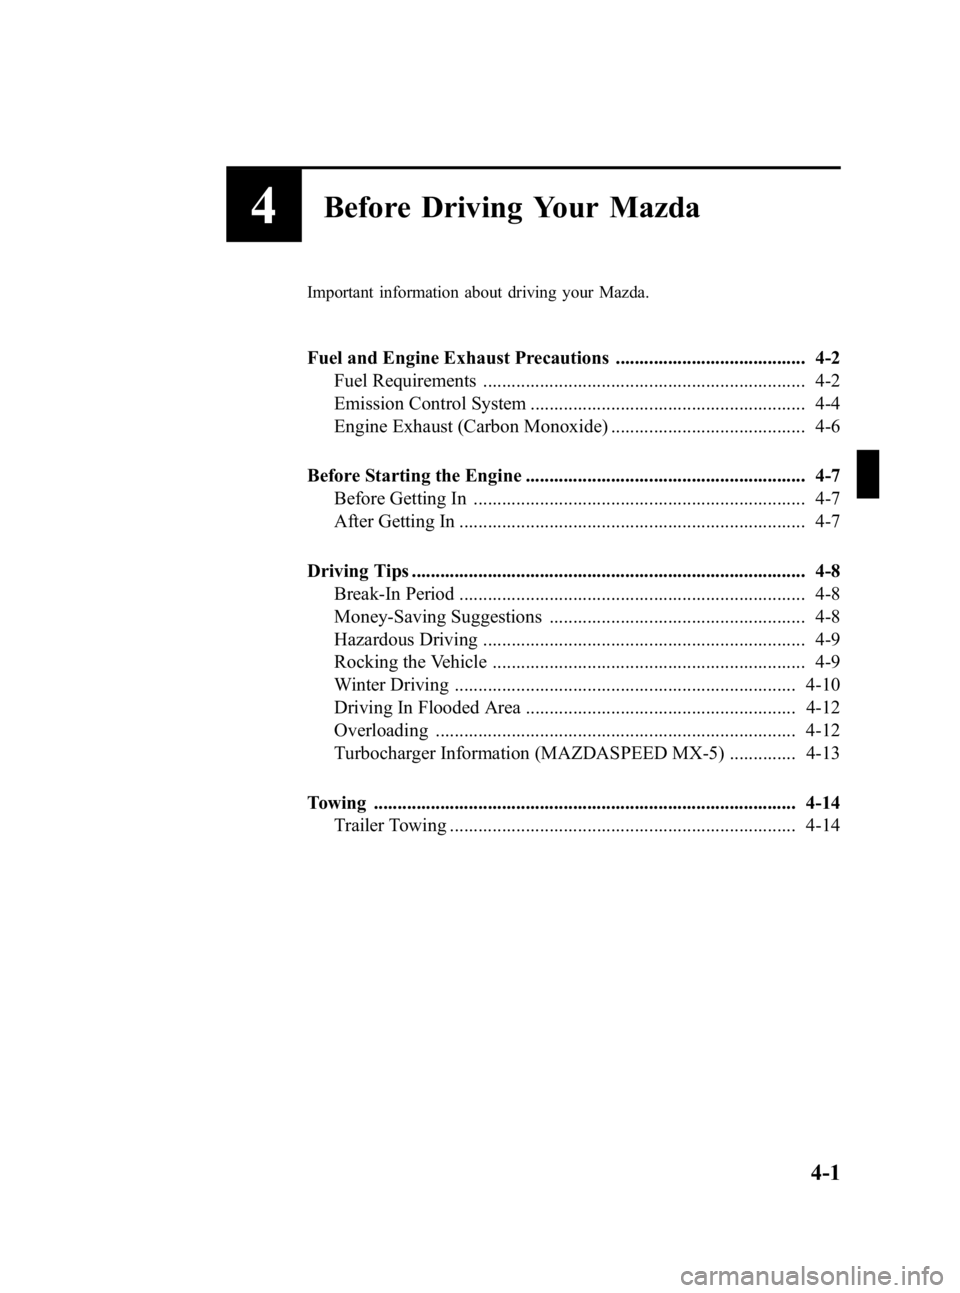 MAZDA MODEL MX-5 MIATA 2005 Manual PDF Black plate (79,1)
4Before Driving Your Mazda
Important information about driving your Mazda.
Fuel and Engine Exhaust Precautions ........................................ 4-2Fuel Requirements ........